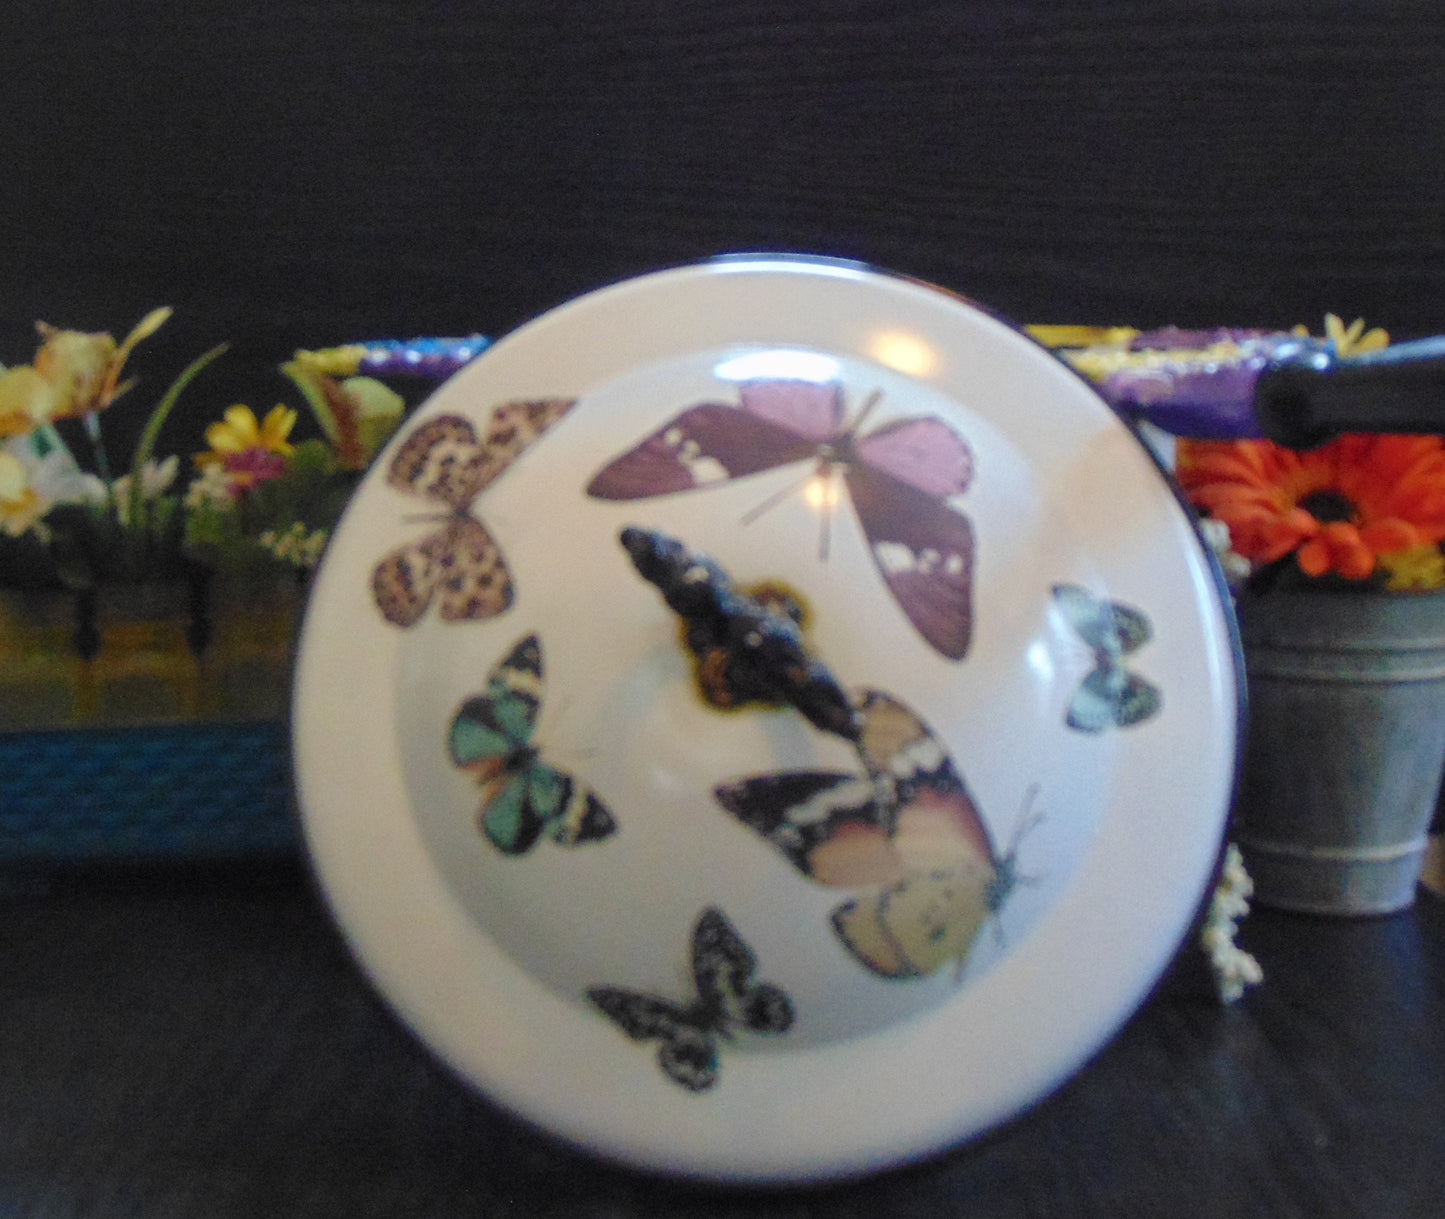 Fluttering Elegance: Upcycled Silver Chafing Dish with Enchanting Butterflies and Artistic Paint Finishes | Sustainable Art | Butterflies